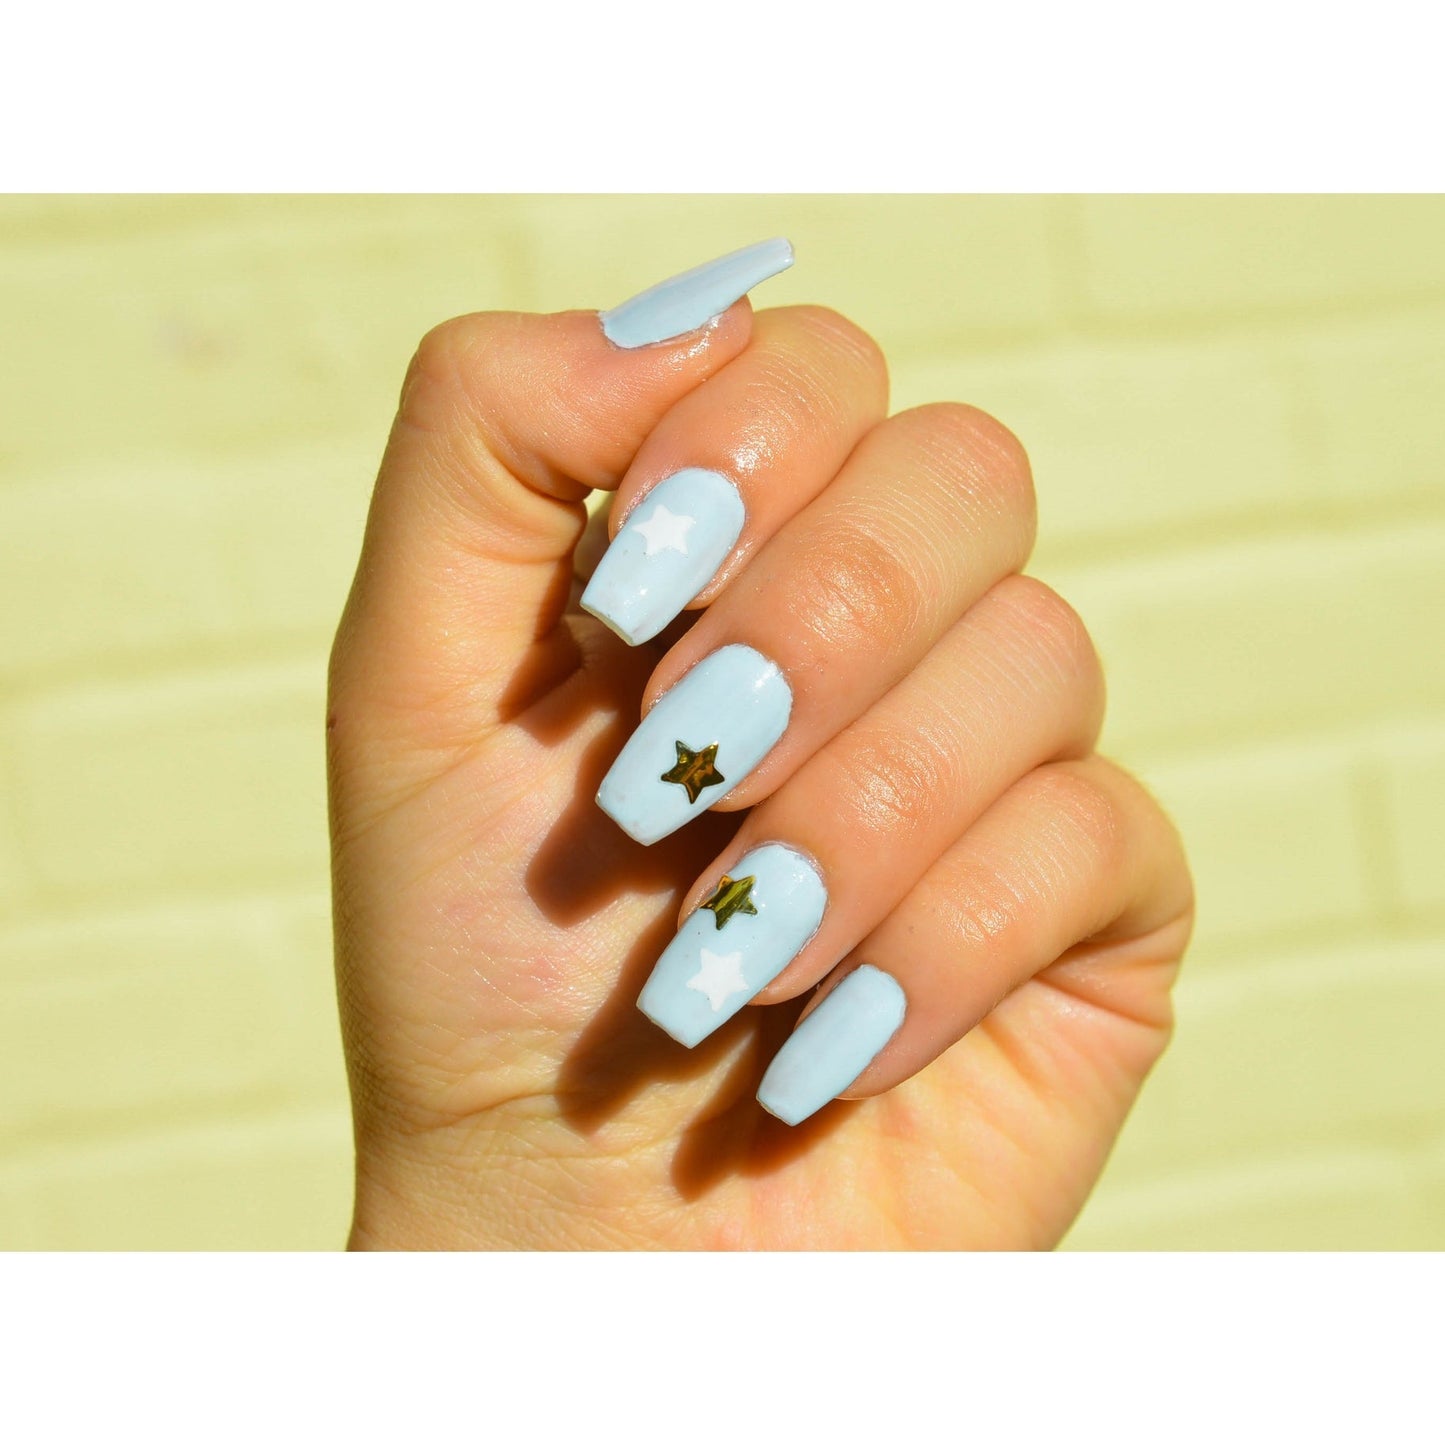 Stars In Your Eyes Nail Art Sticker Set | Vegan & Cruelty-Free | Use on Polish, Gel, or Natural Nails